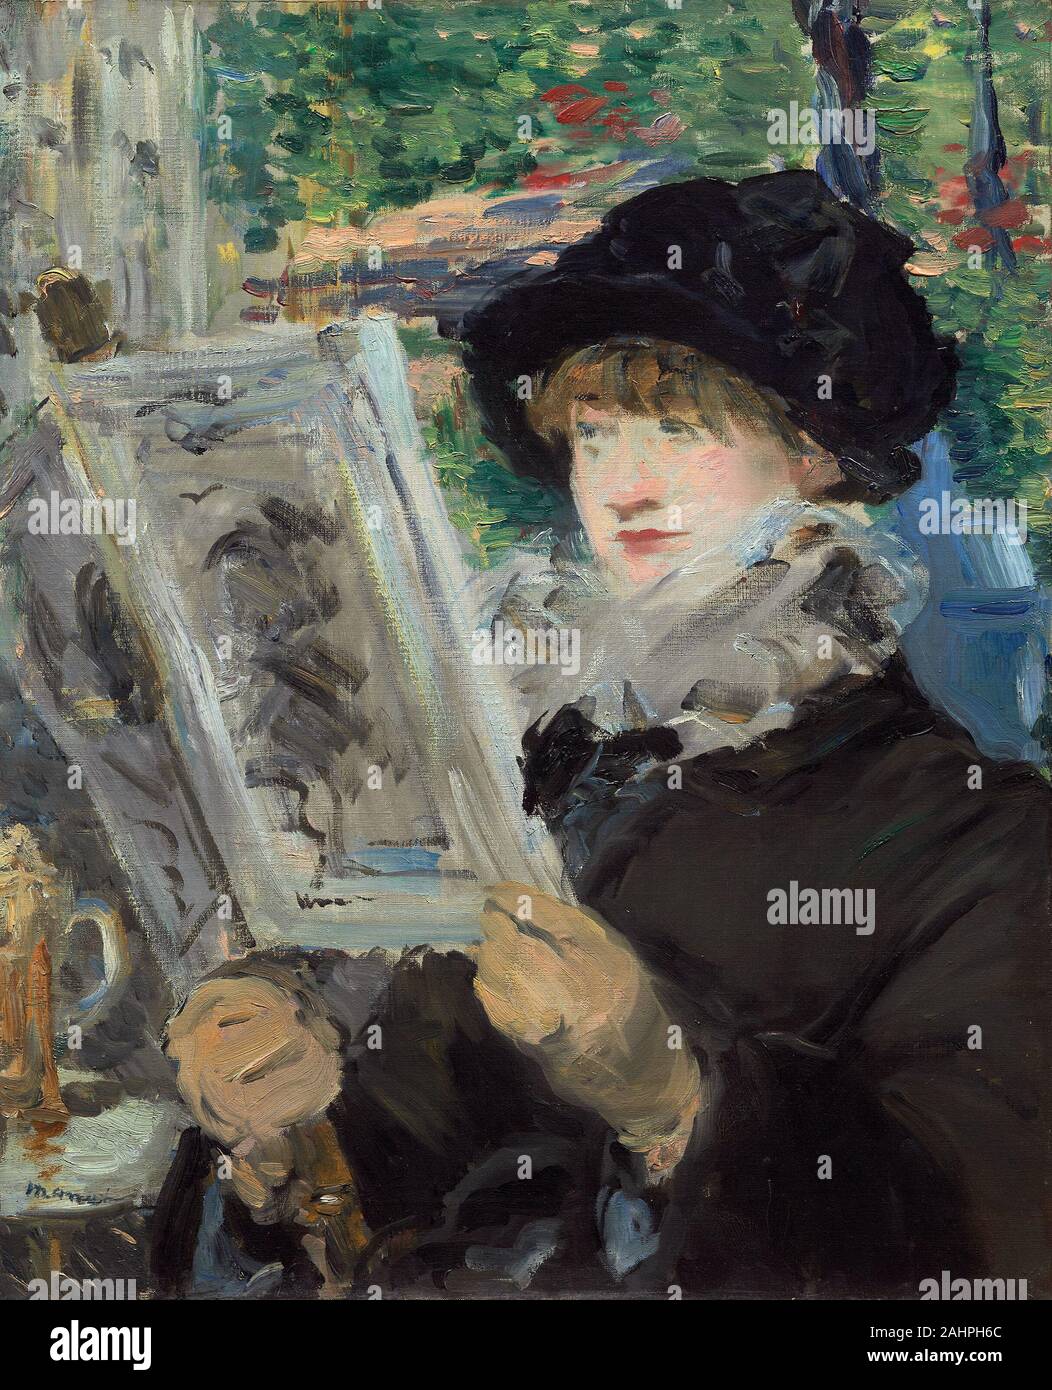 Édouard Manet. Woman Reading. 1880–1881. France. Oil on canvas During the late nineteenth century, Parisian cafés were the gathering places of artists and writers and were ideal locations for observing the urban scene. Many Impressionist paintings depict the Café Nouvelle-Athènes on the rue Pigalle, where two tables were reserved for Édouard Manet and his circle—a group that included the painters Edgar Degas, Claude Monet, Camille Pissarro, and Pierre-Auguste Renoir, and the writers Charles Baudelaire and Émile Zola.At first glance, this fashionably dressed young woman appears to have been cap Stock Photo